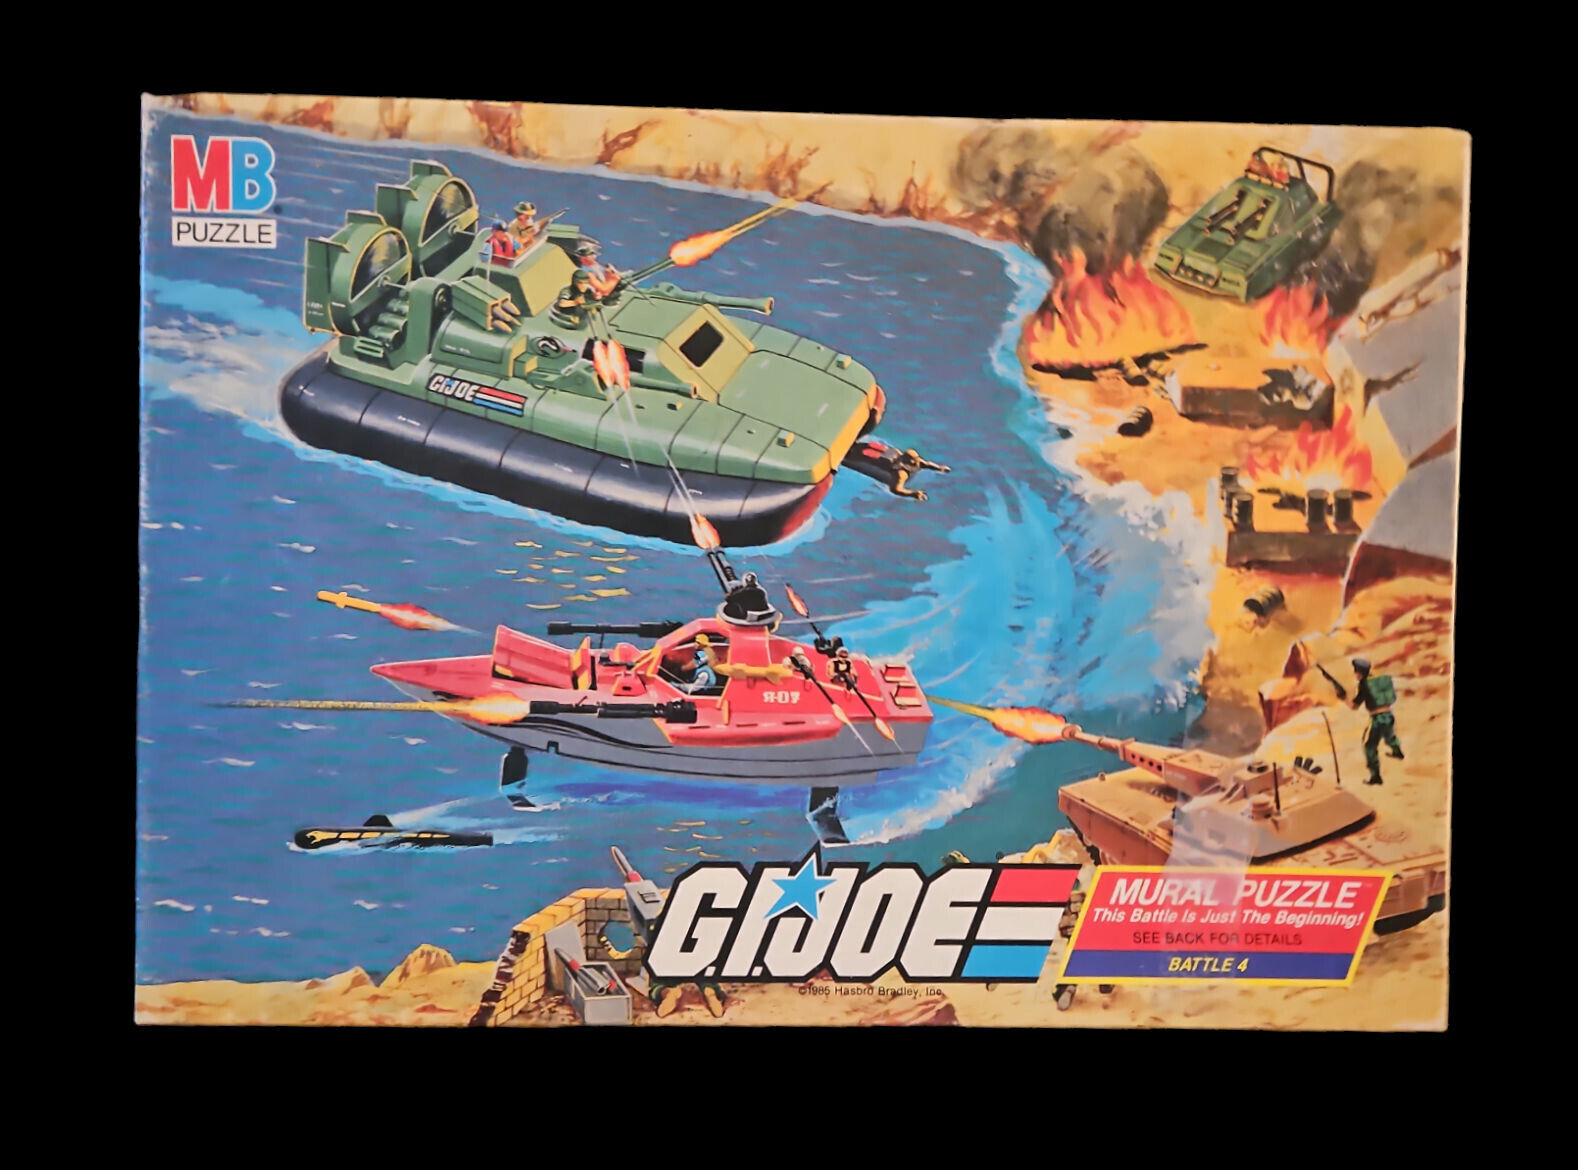 1985 G.I. JOE MURAL PUZZLE SCENE "THIS BATTLE IS JUST THE BEGINNING" COMPLETE Undisclosed